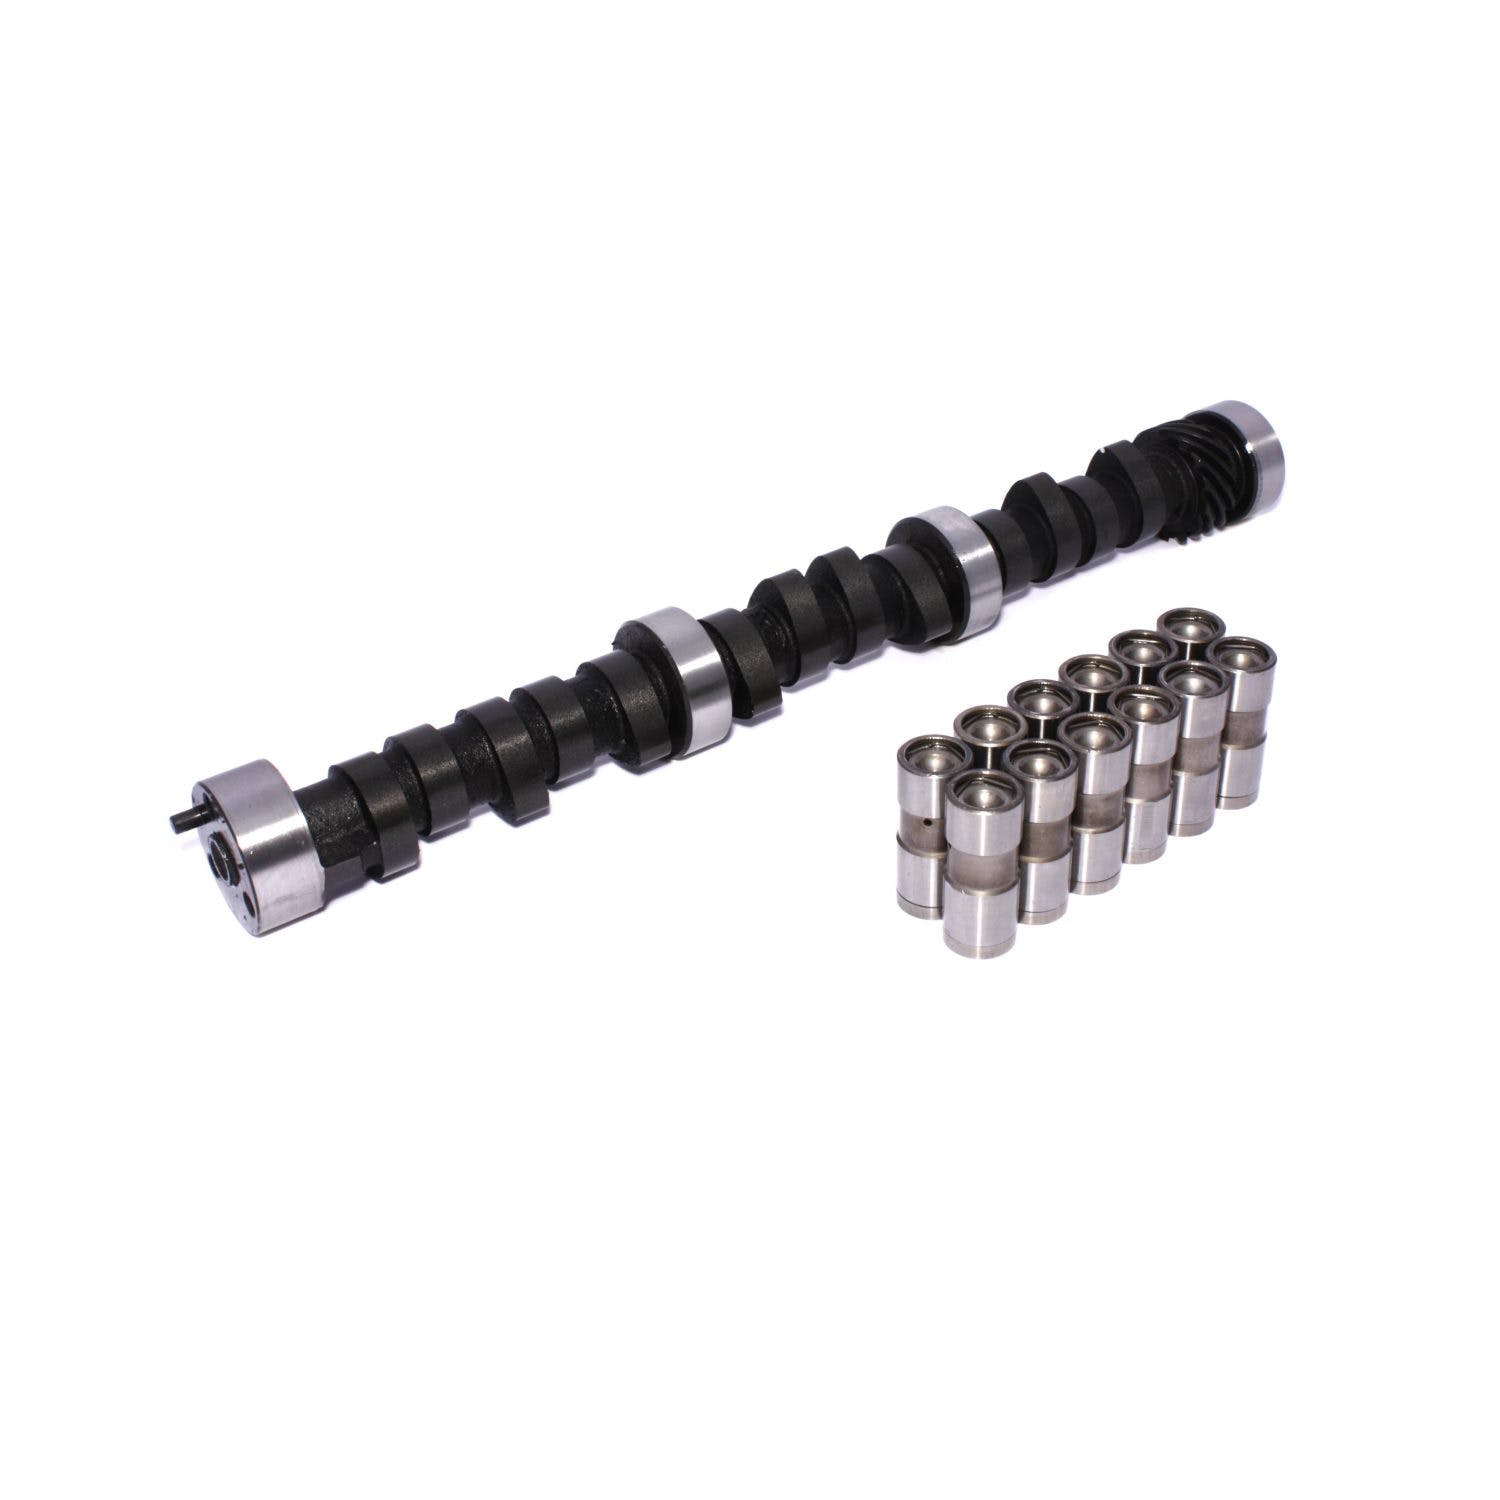 Competition Cams CL16-115-4 High Energy Camshaft/Lifter Kit